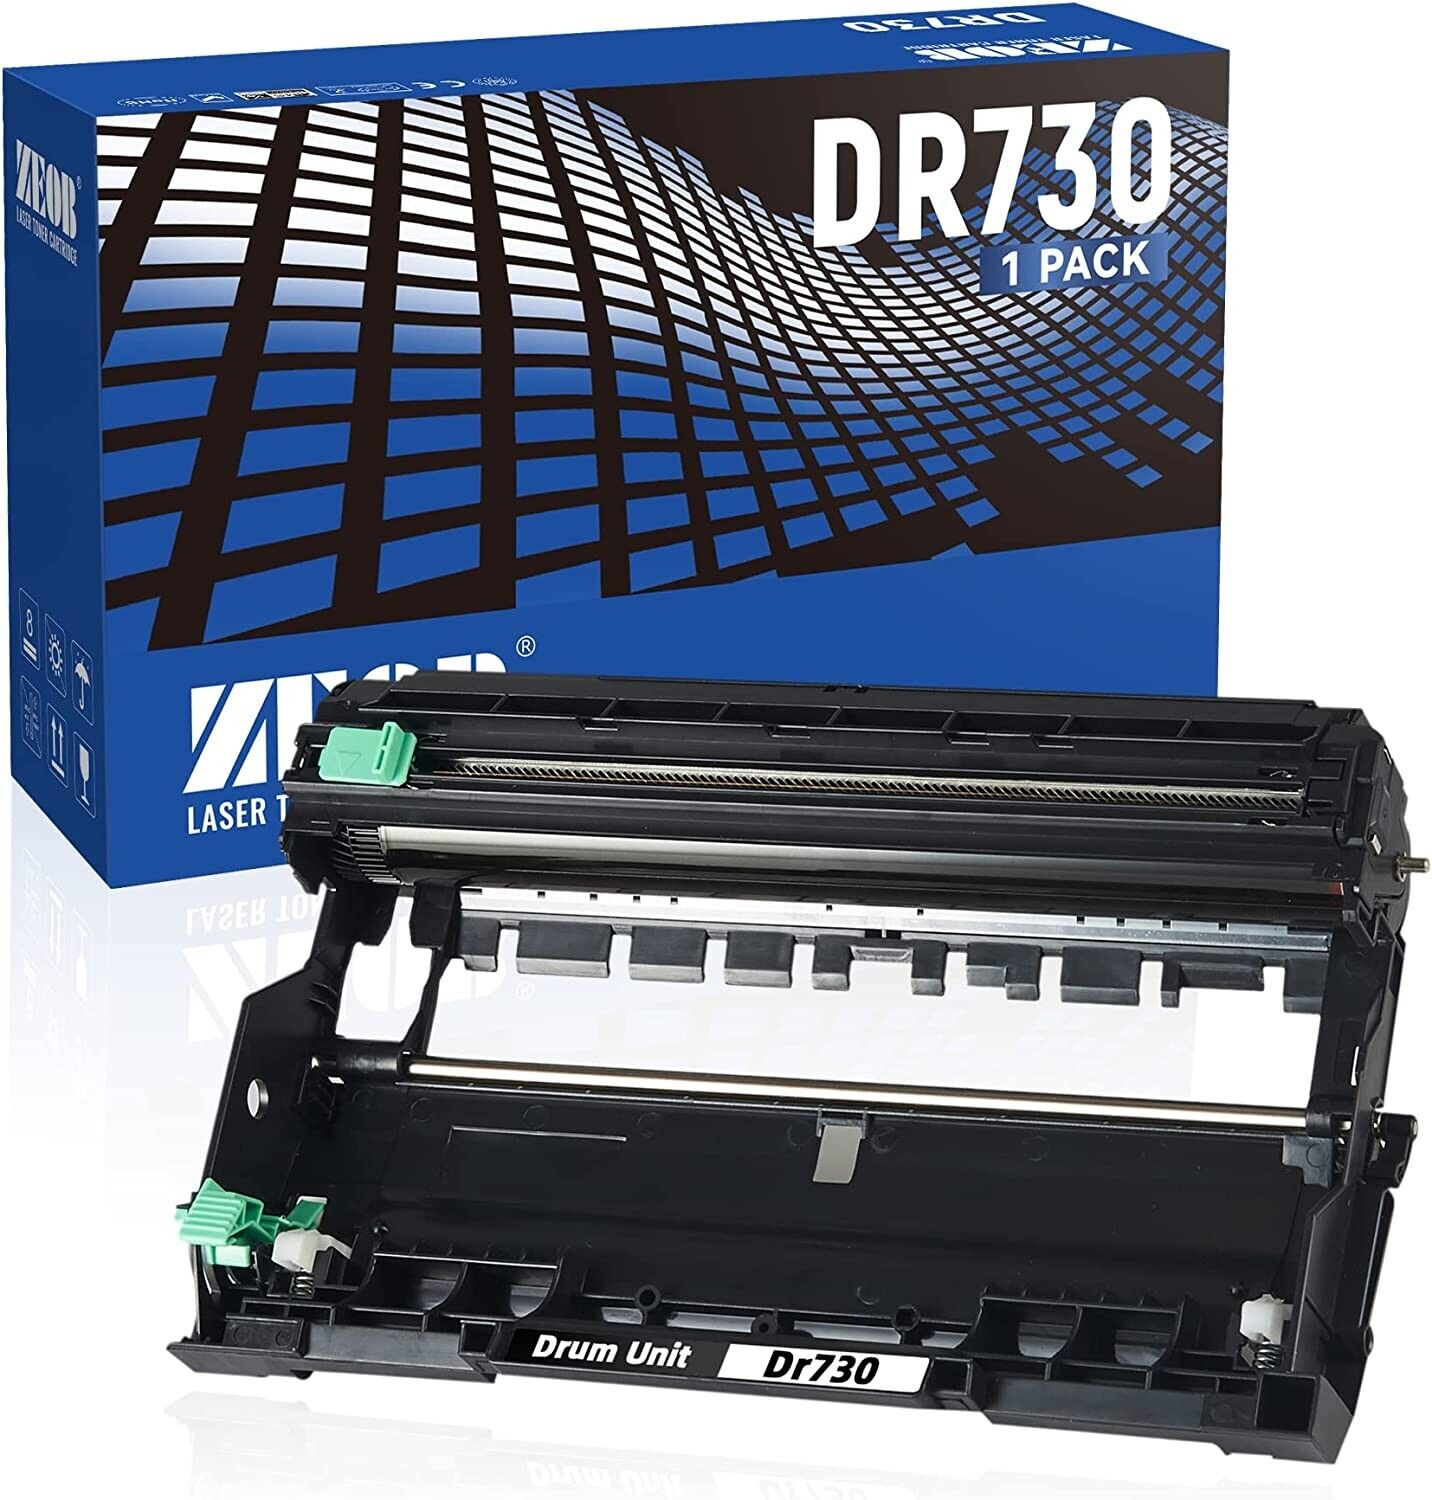 Replacement Compatible for Printer Brother DR730 Drum Cartridge